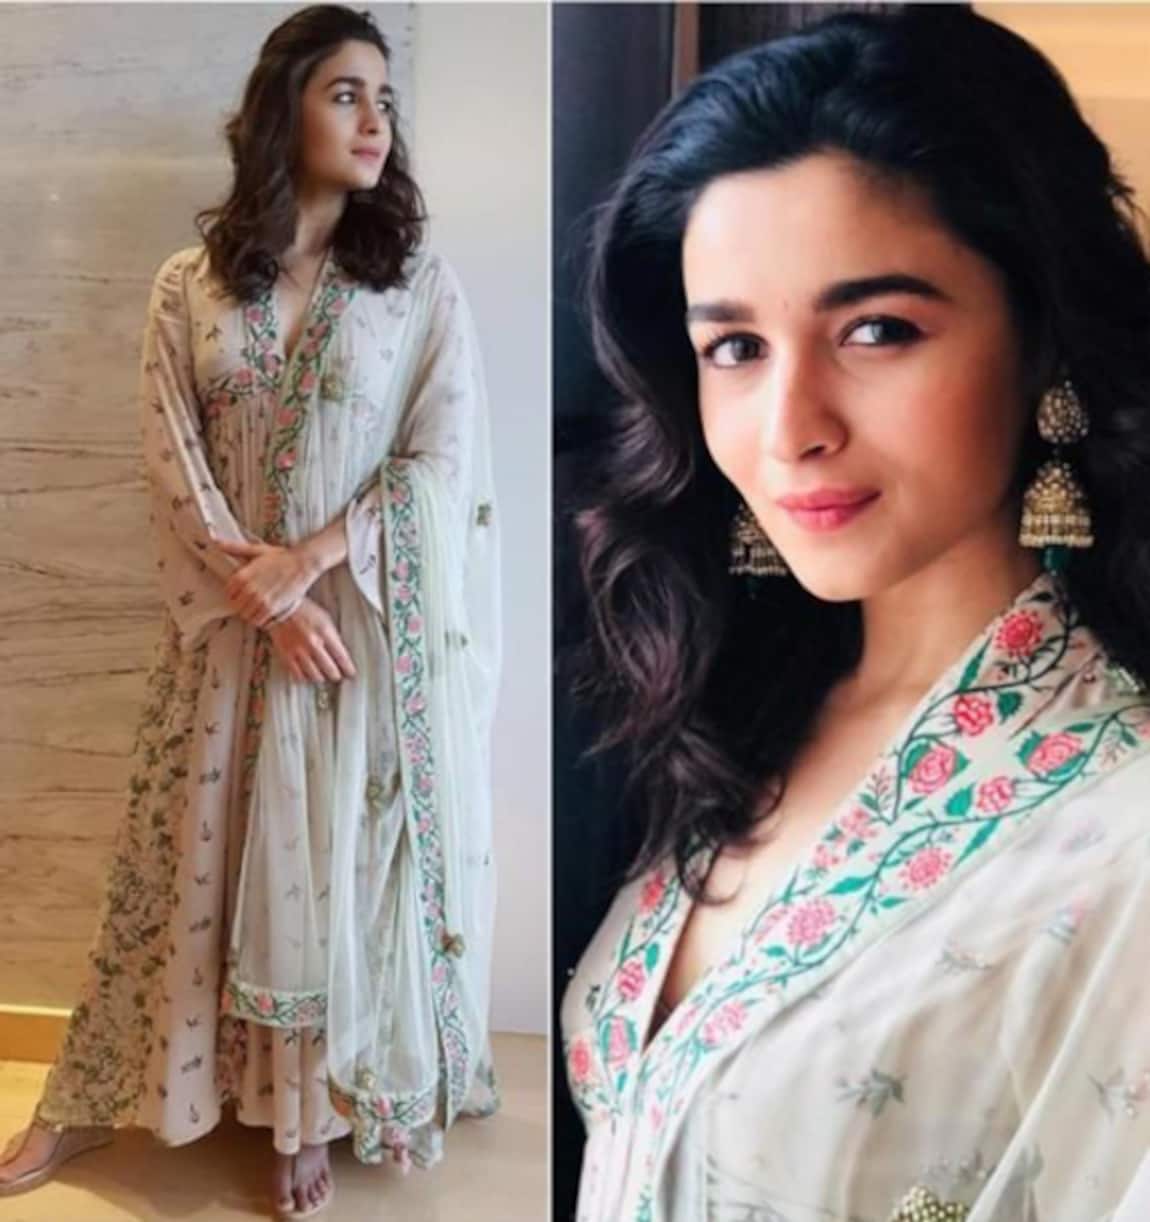 Alia dress cost | Alia Bhatt steps out in the city wearing a floral maxi  dress that costs around a whopping Rs 1,00,000